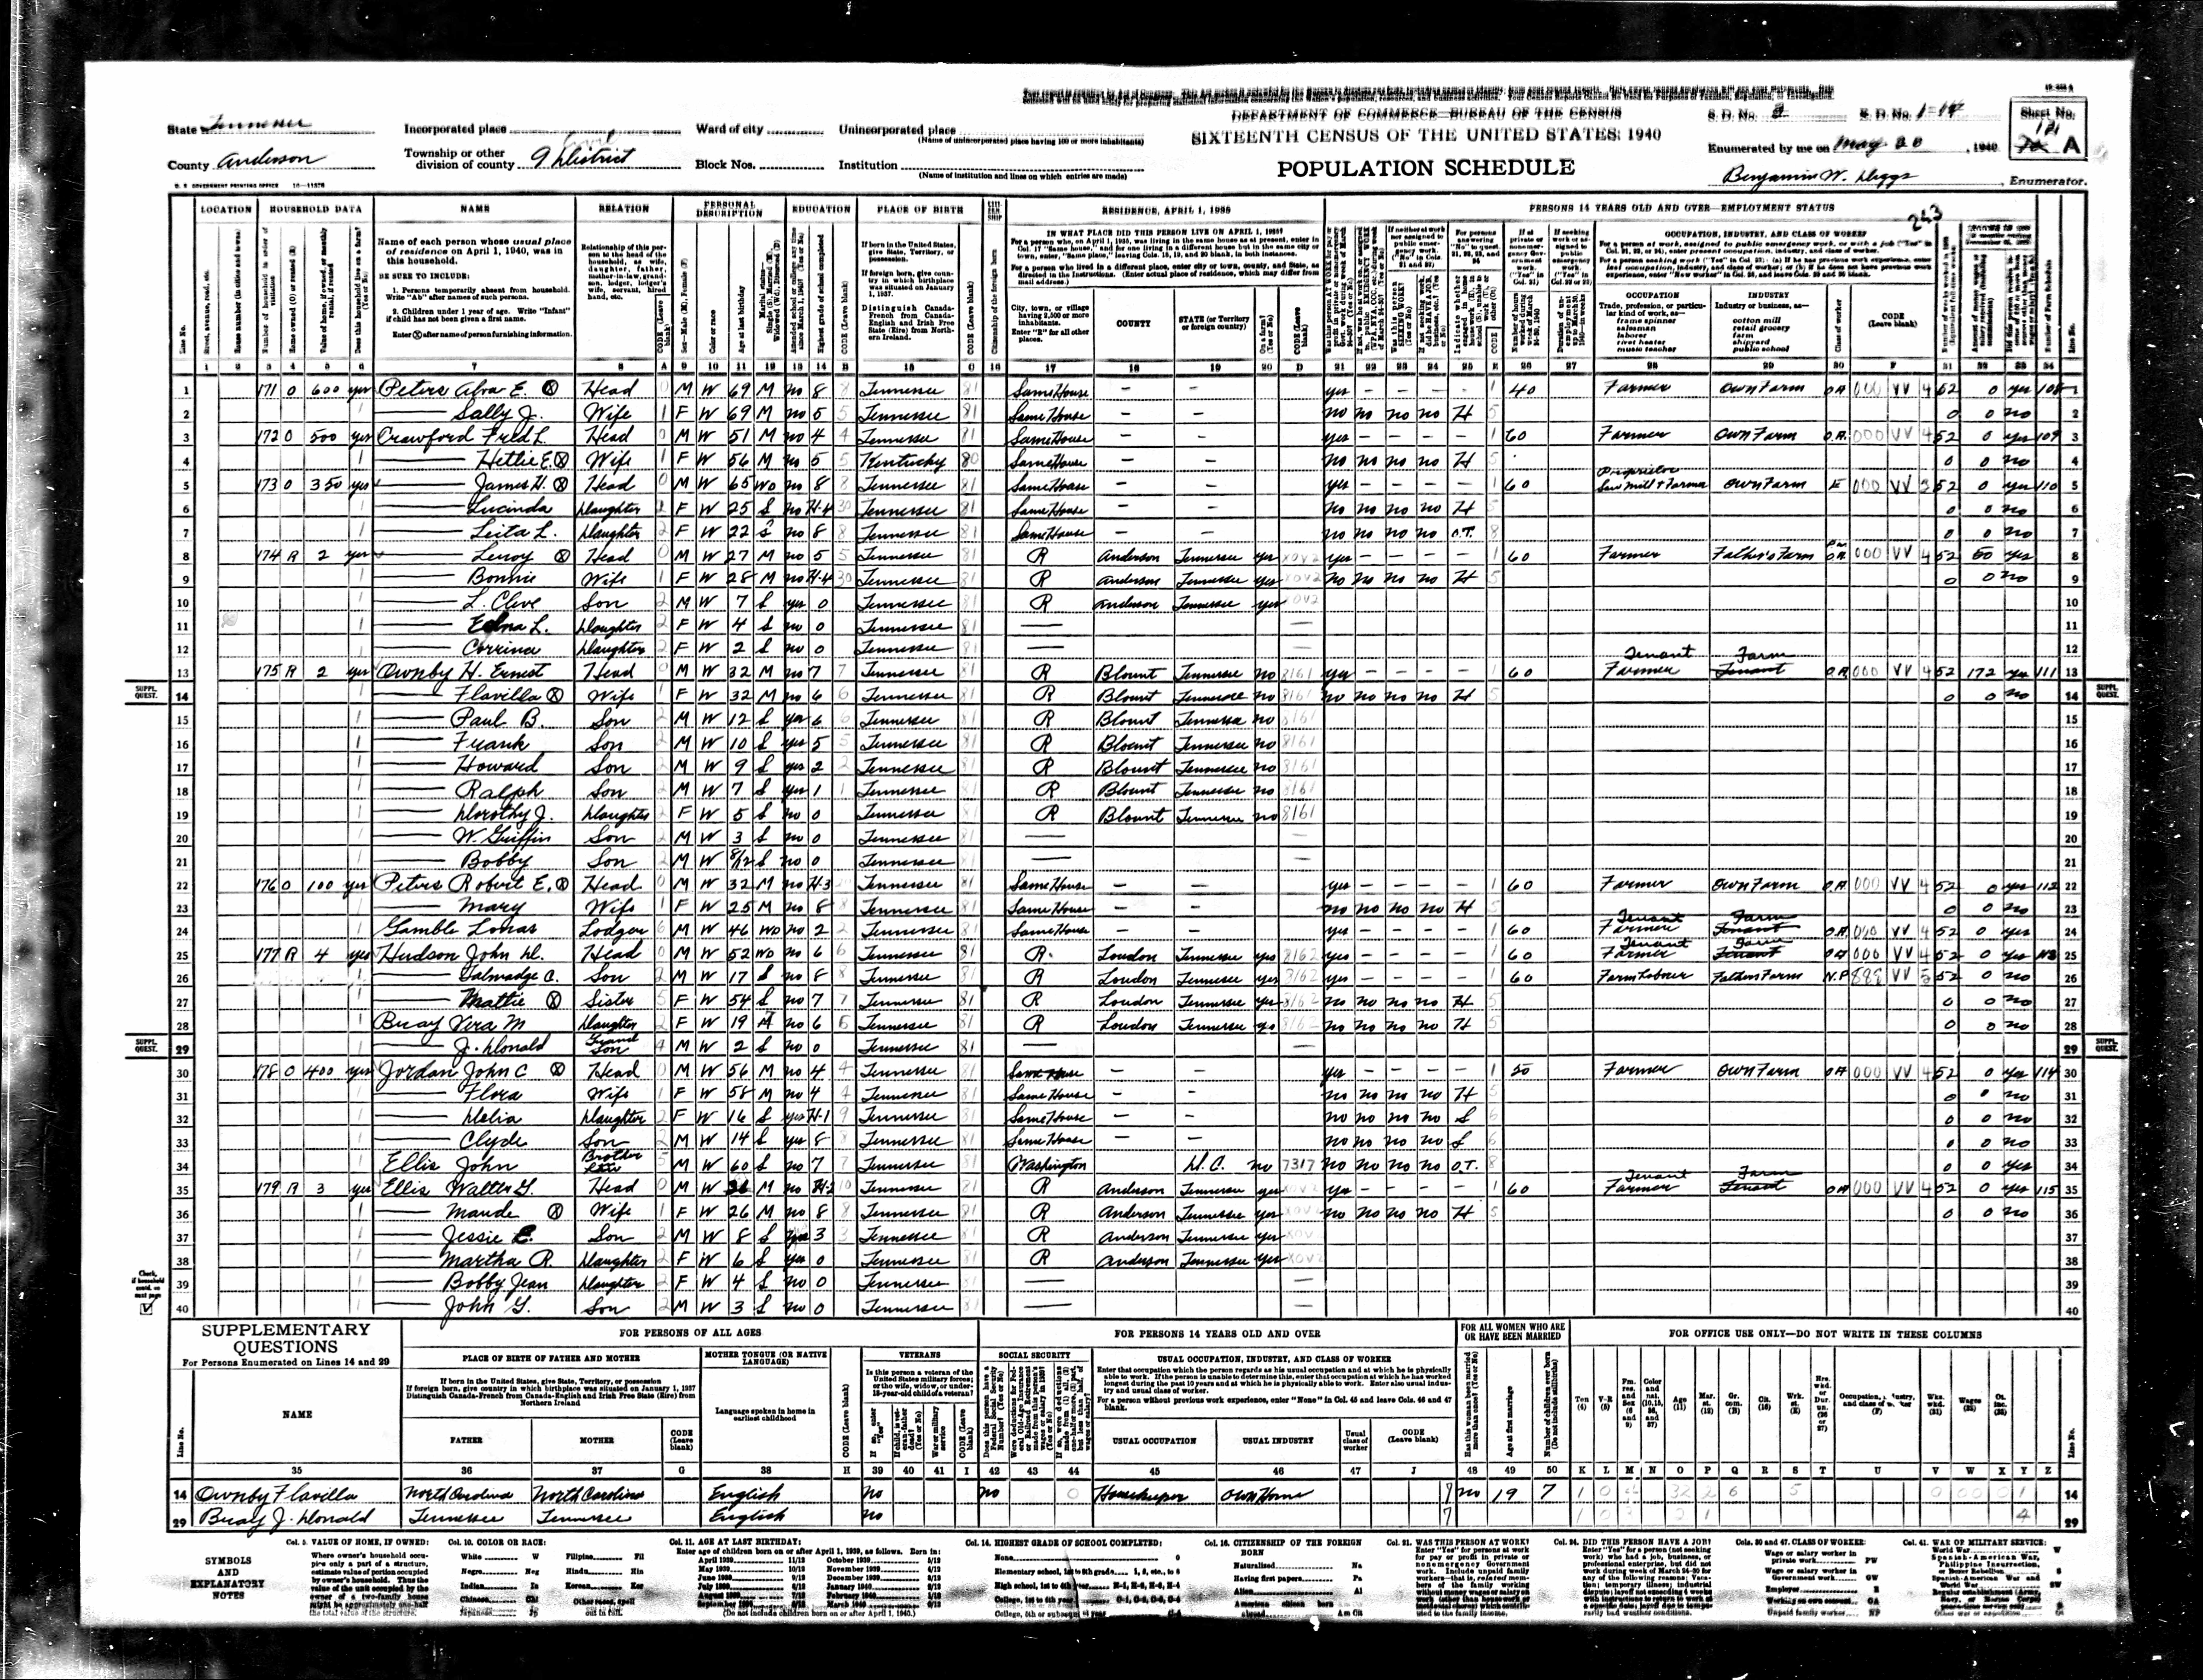 1940 U.S. Census, Anderson County, Tennessee, Dist. 9, page 243a